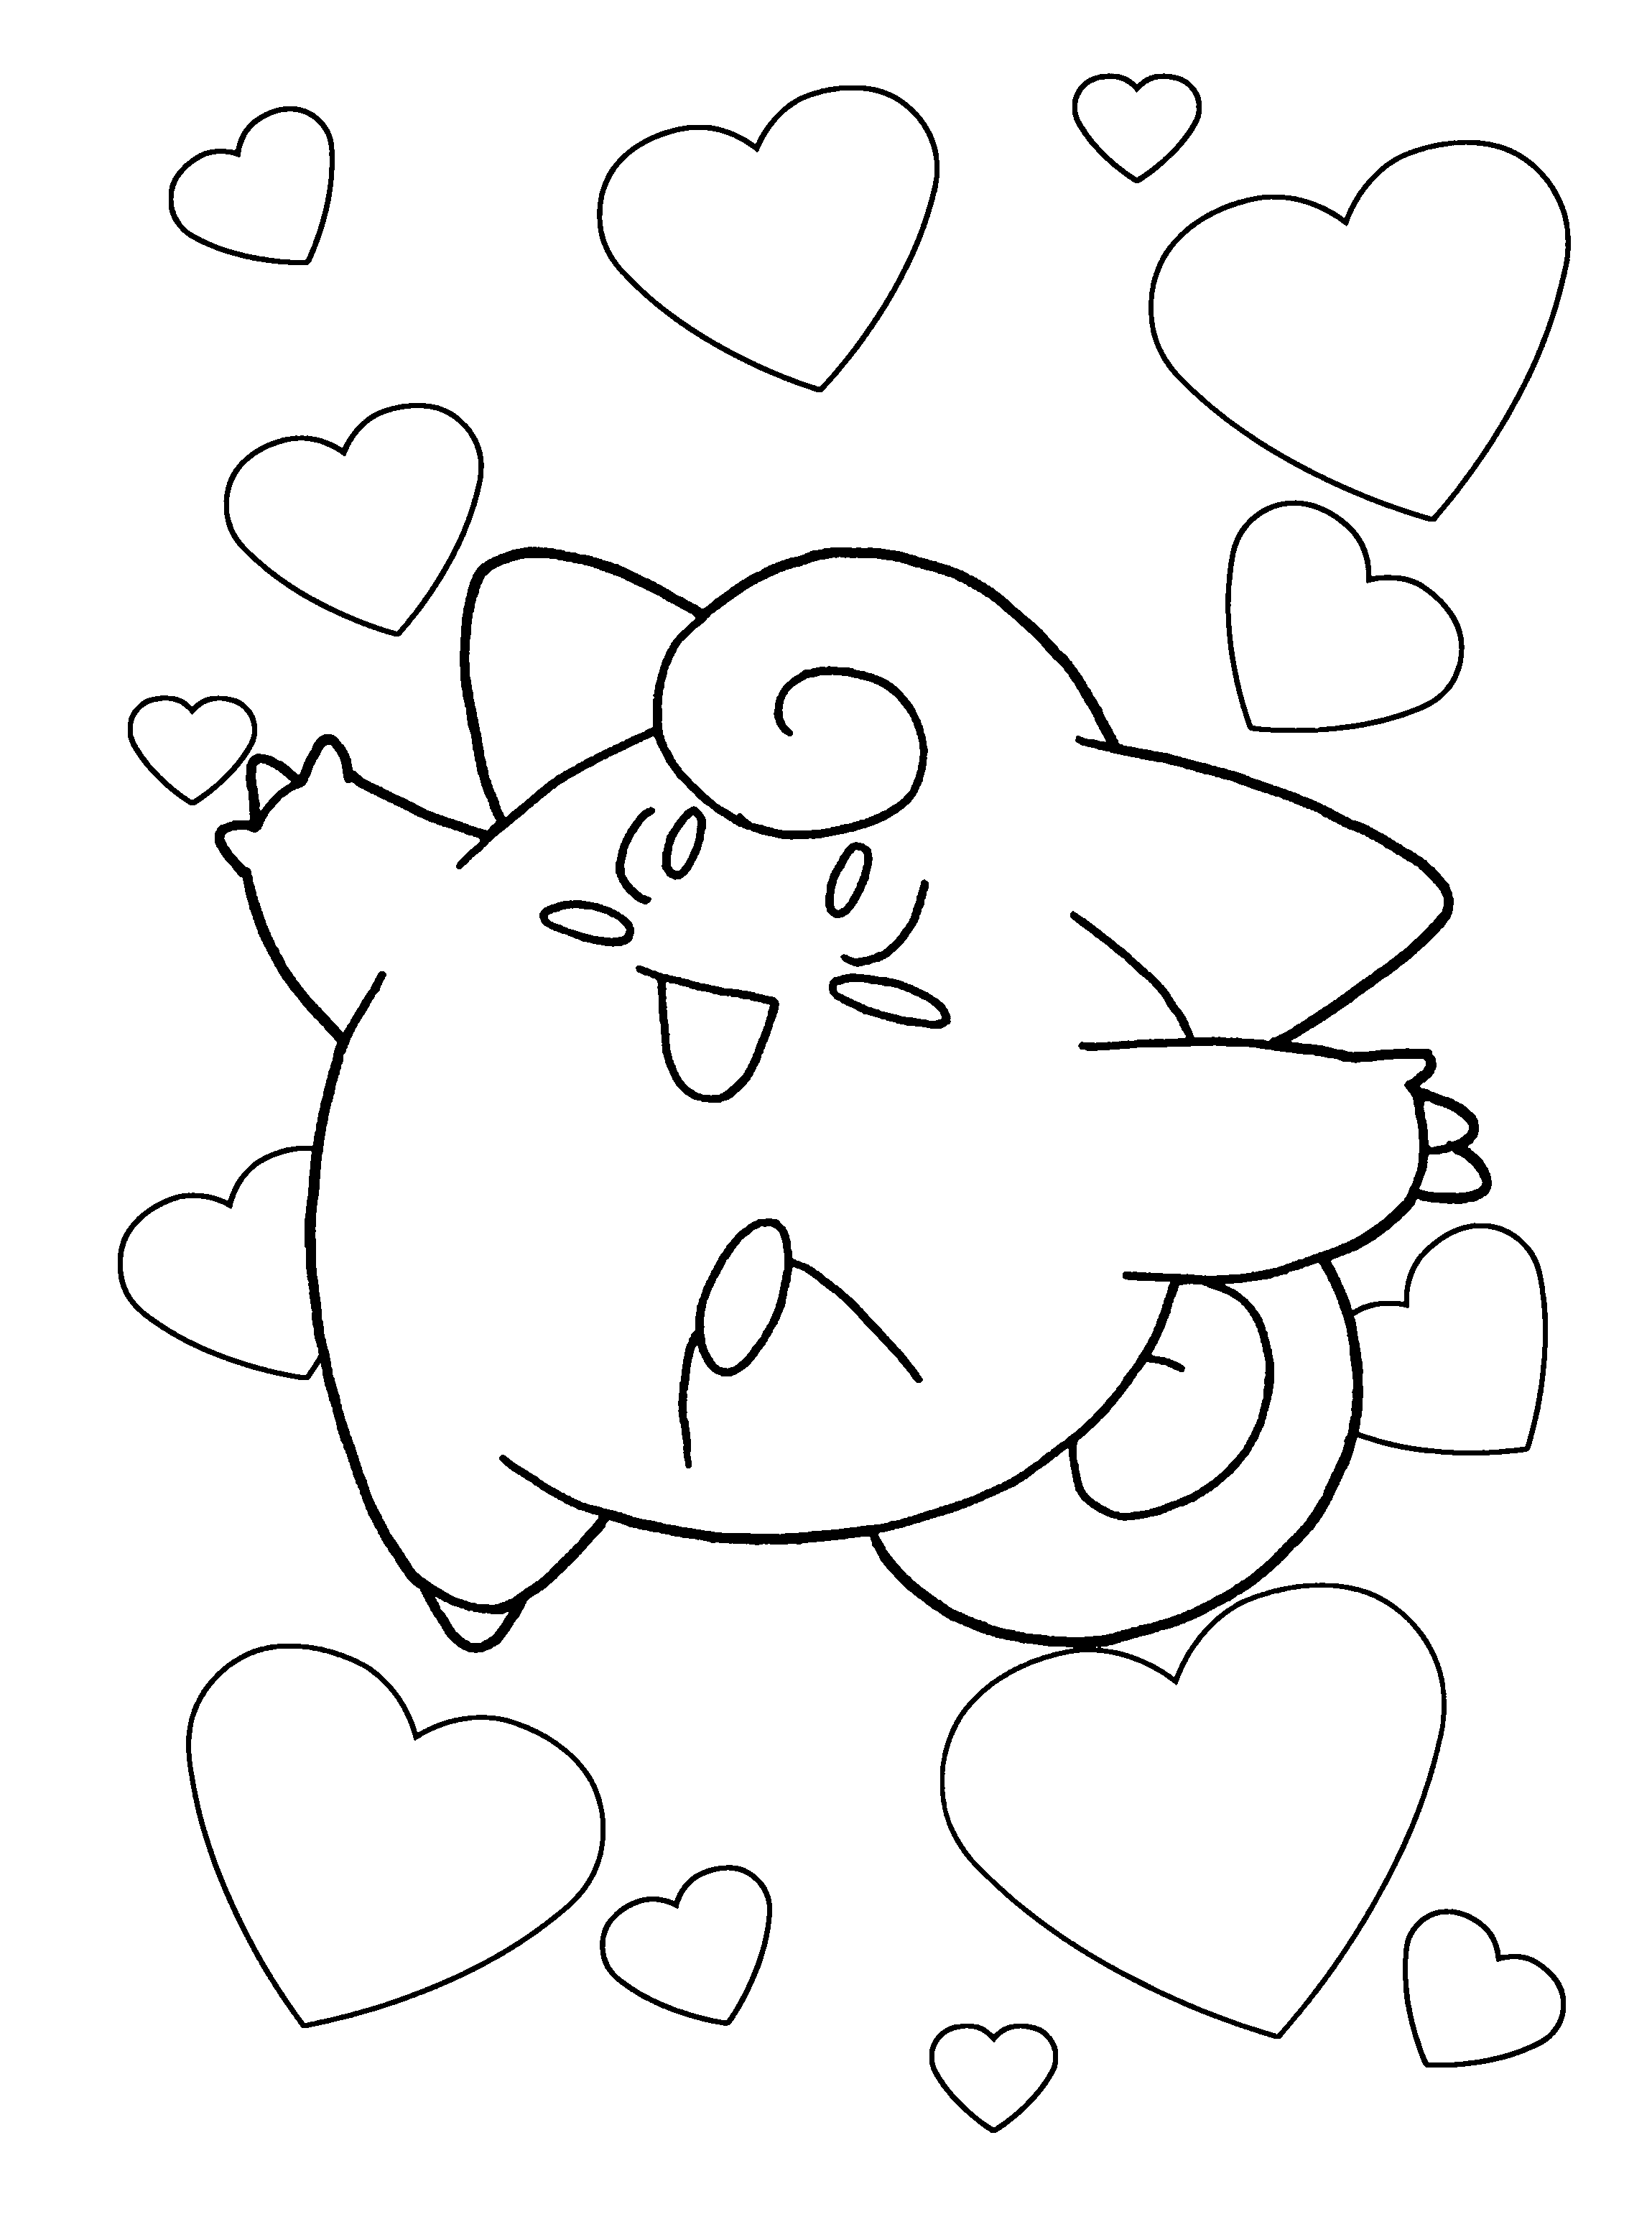 pokmon coloring pages pokemon coloring pages join your favorite pokemon on an coloring pages pokmon 